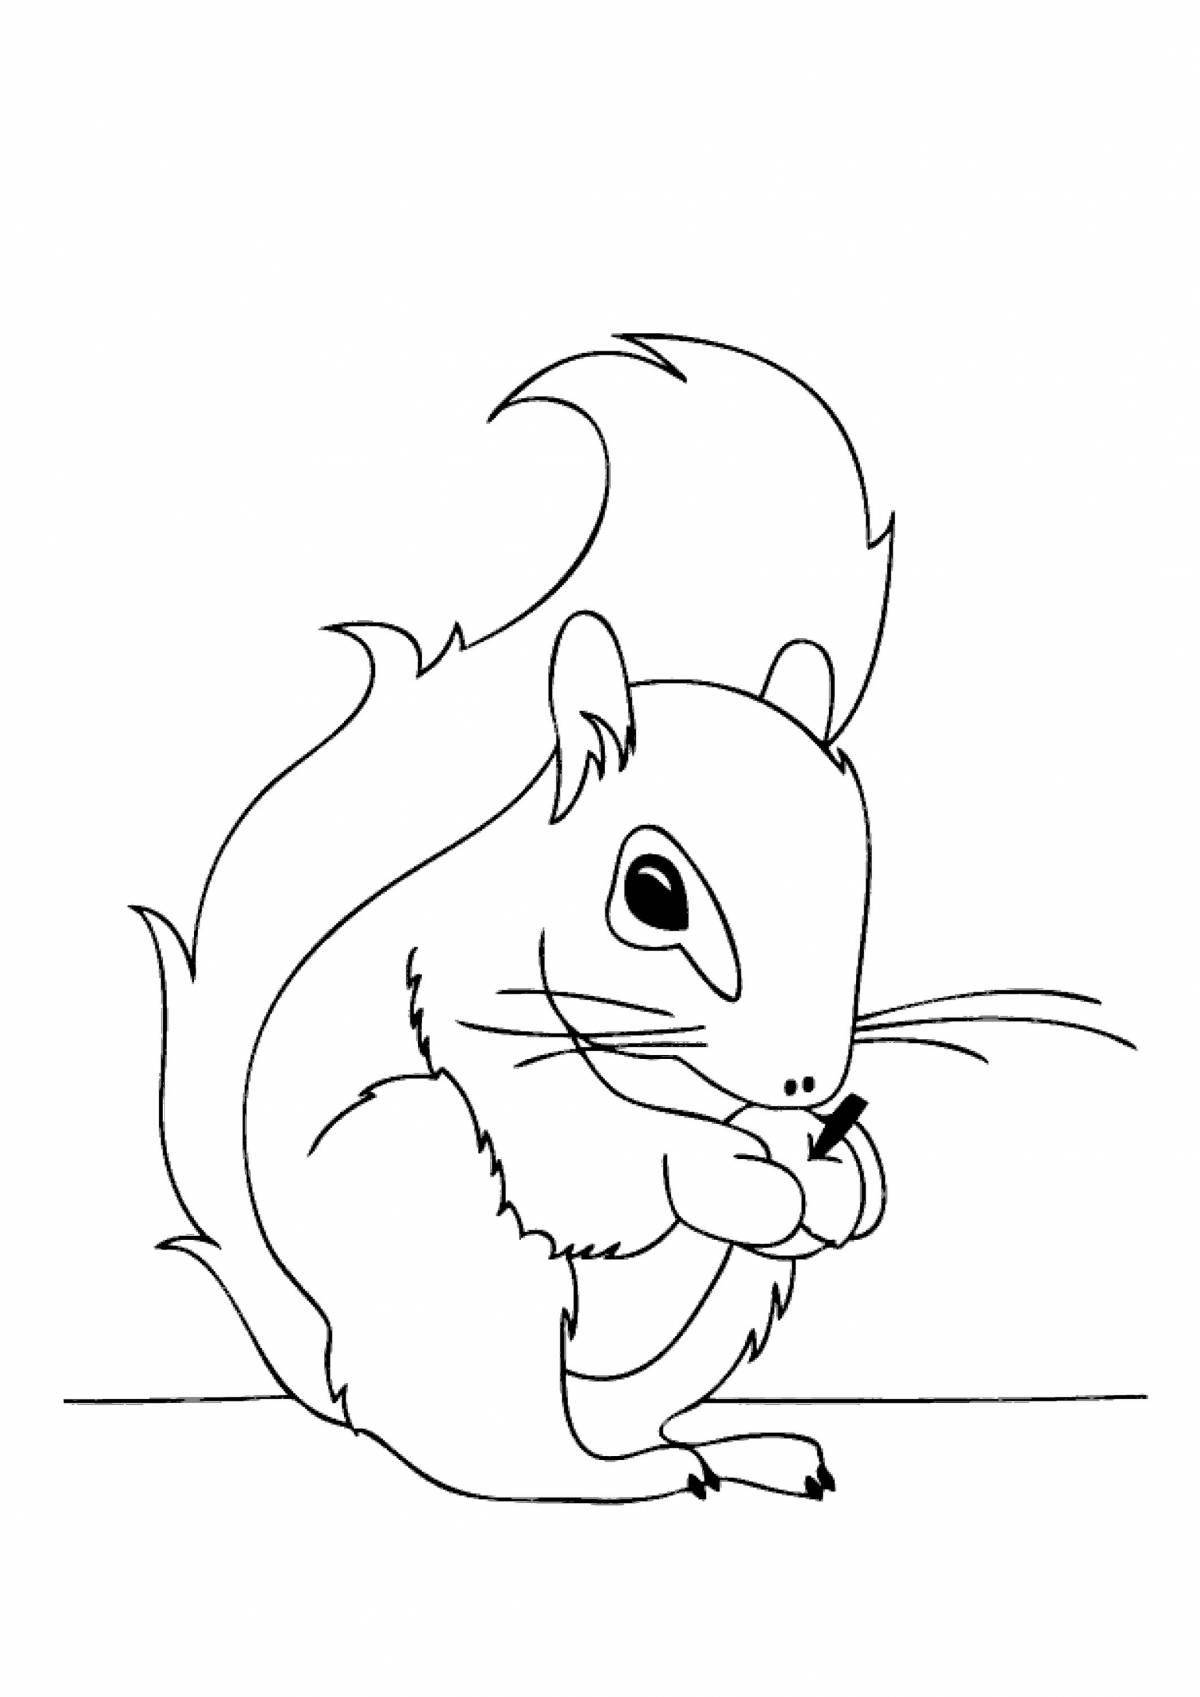 Cute squirrel coloring book for kids